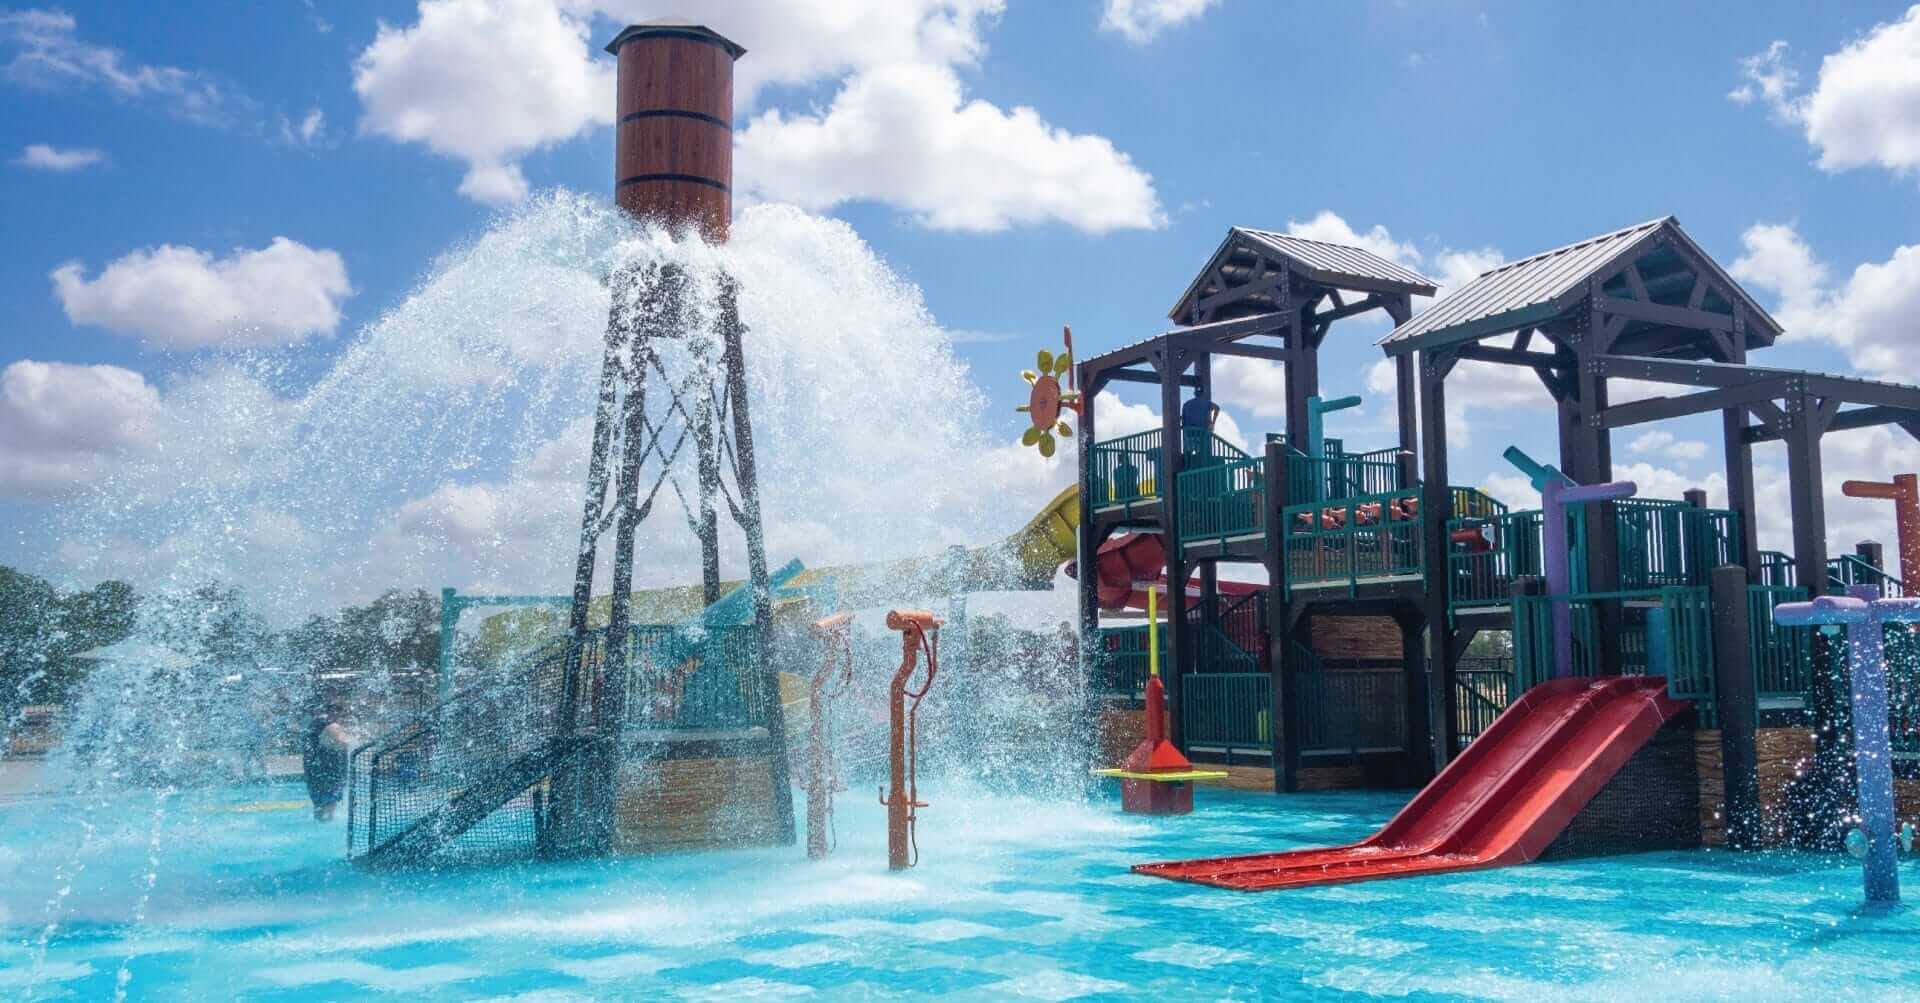 The Power Plunge water feature releases a large amount of water over the pool floor in a 360-degree spray pattern at the Camp Fimfo in Waco Texas.